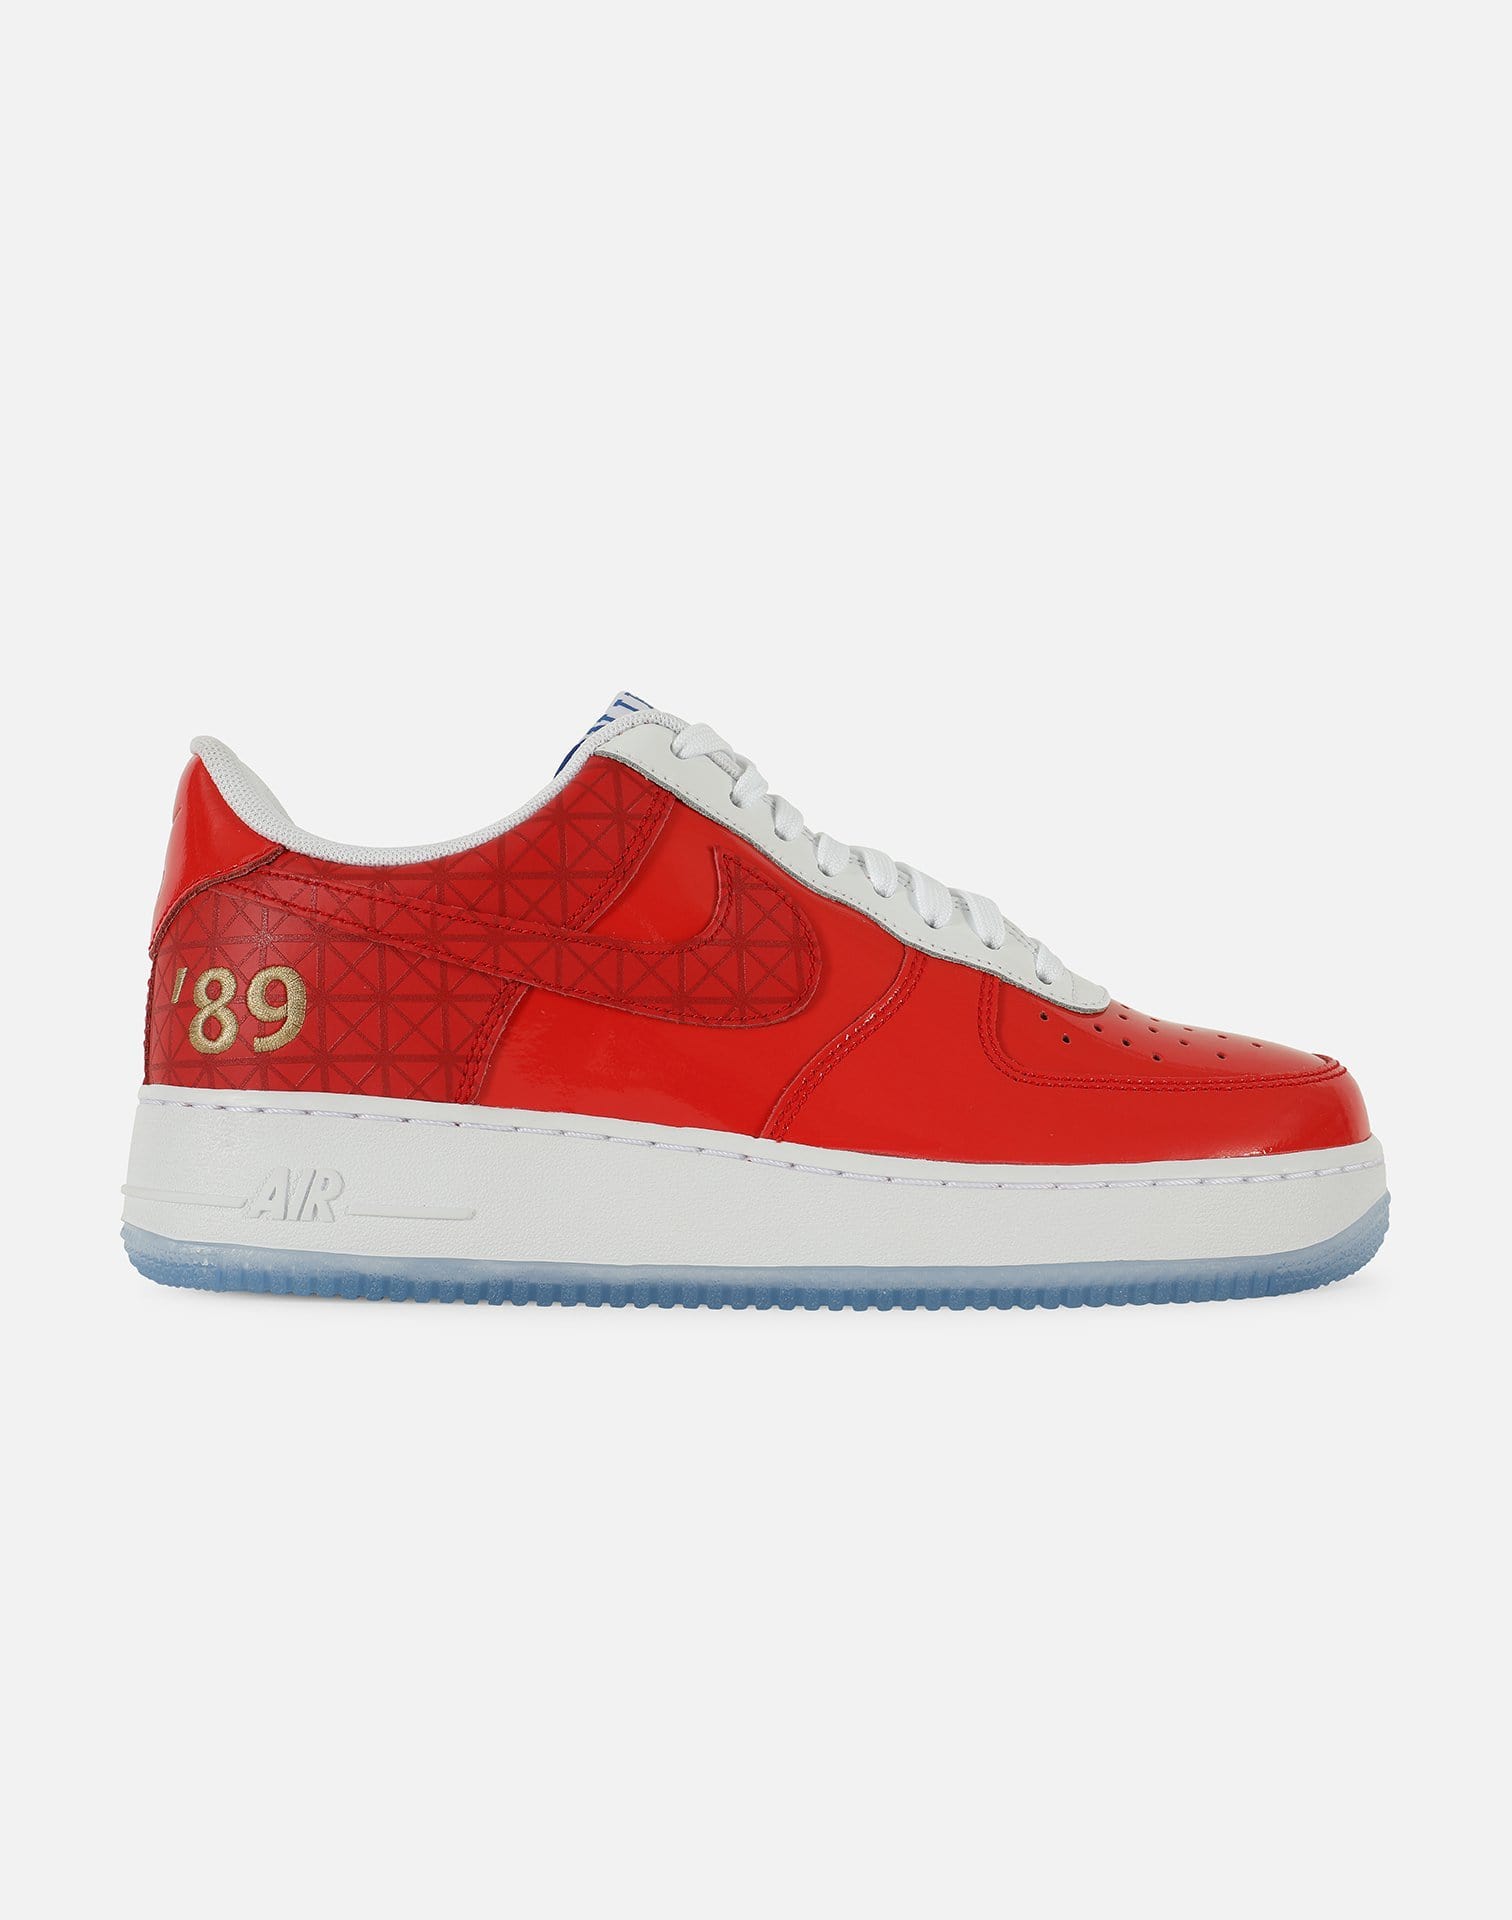 Nike Me's Air Force 1 '07 Low LV8 '1989 NBA Finals'